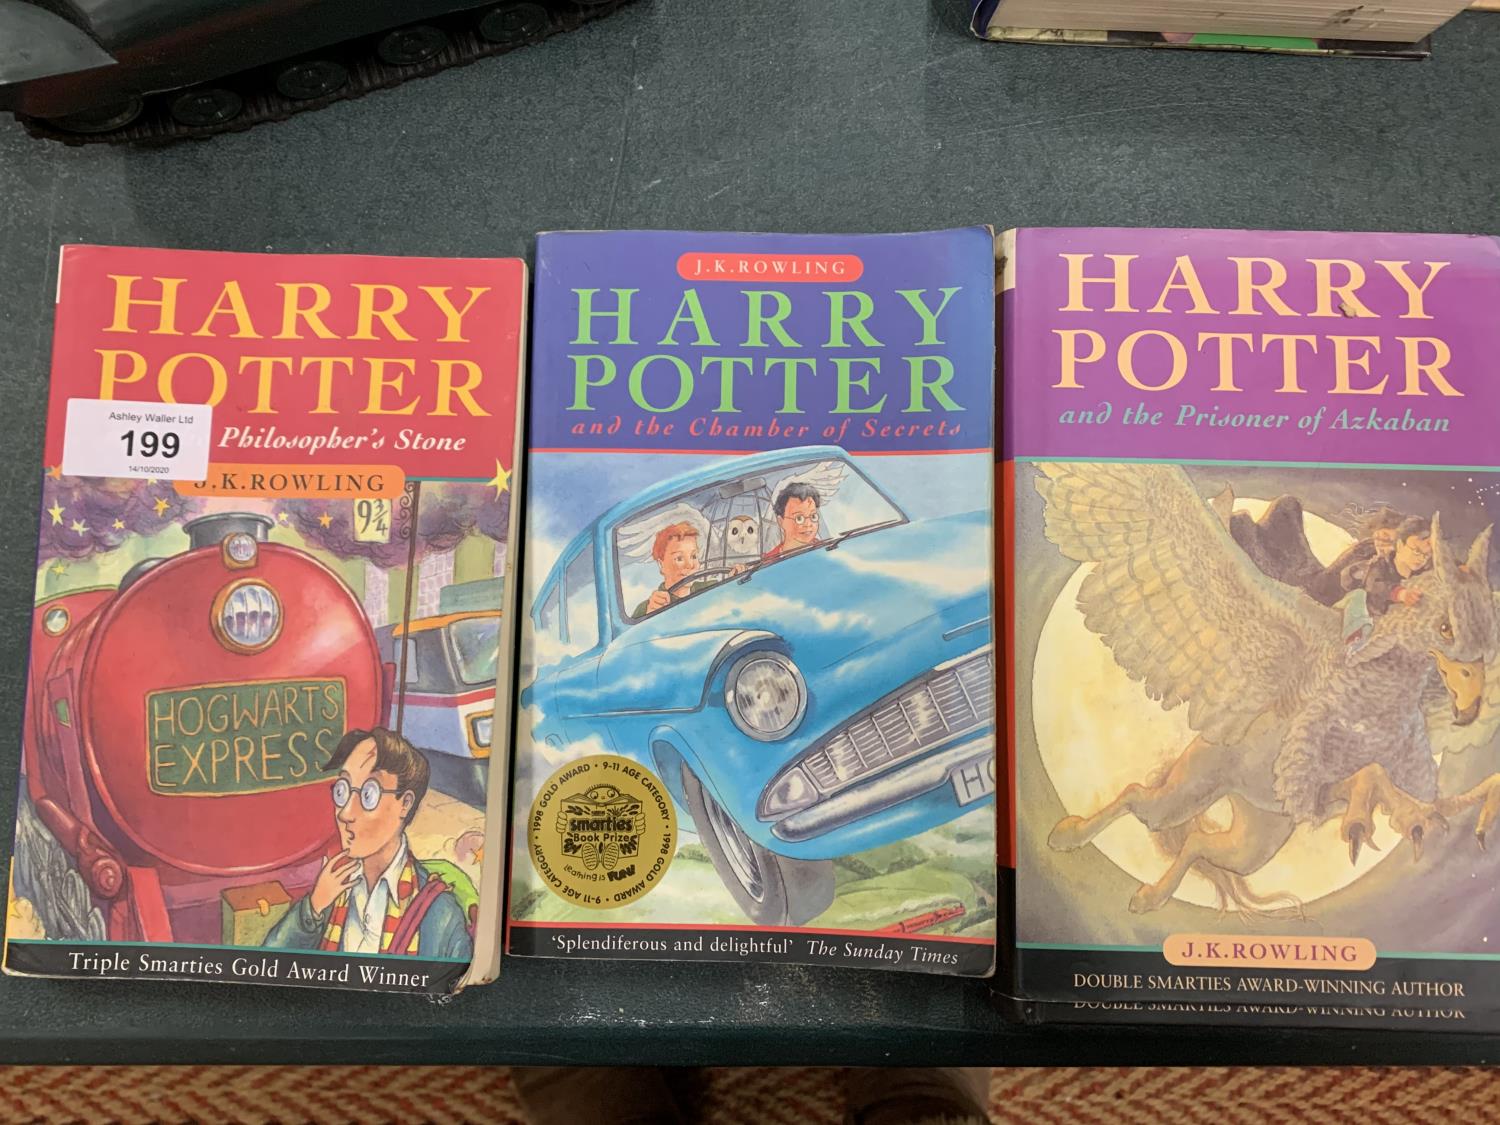 A TRIO OF BOOKS FROM THE HARRY POTTER SERIES: 'THE PRISONER OF AZKABAN', 'THE CHAMBER OF SECRETS'